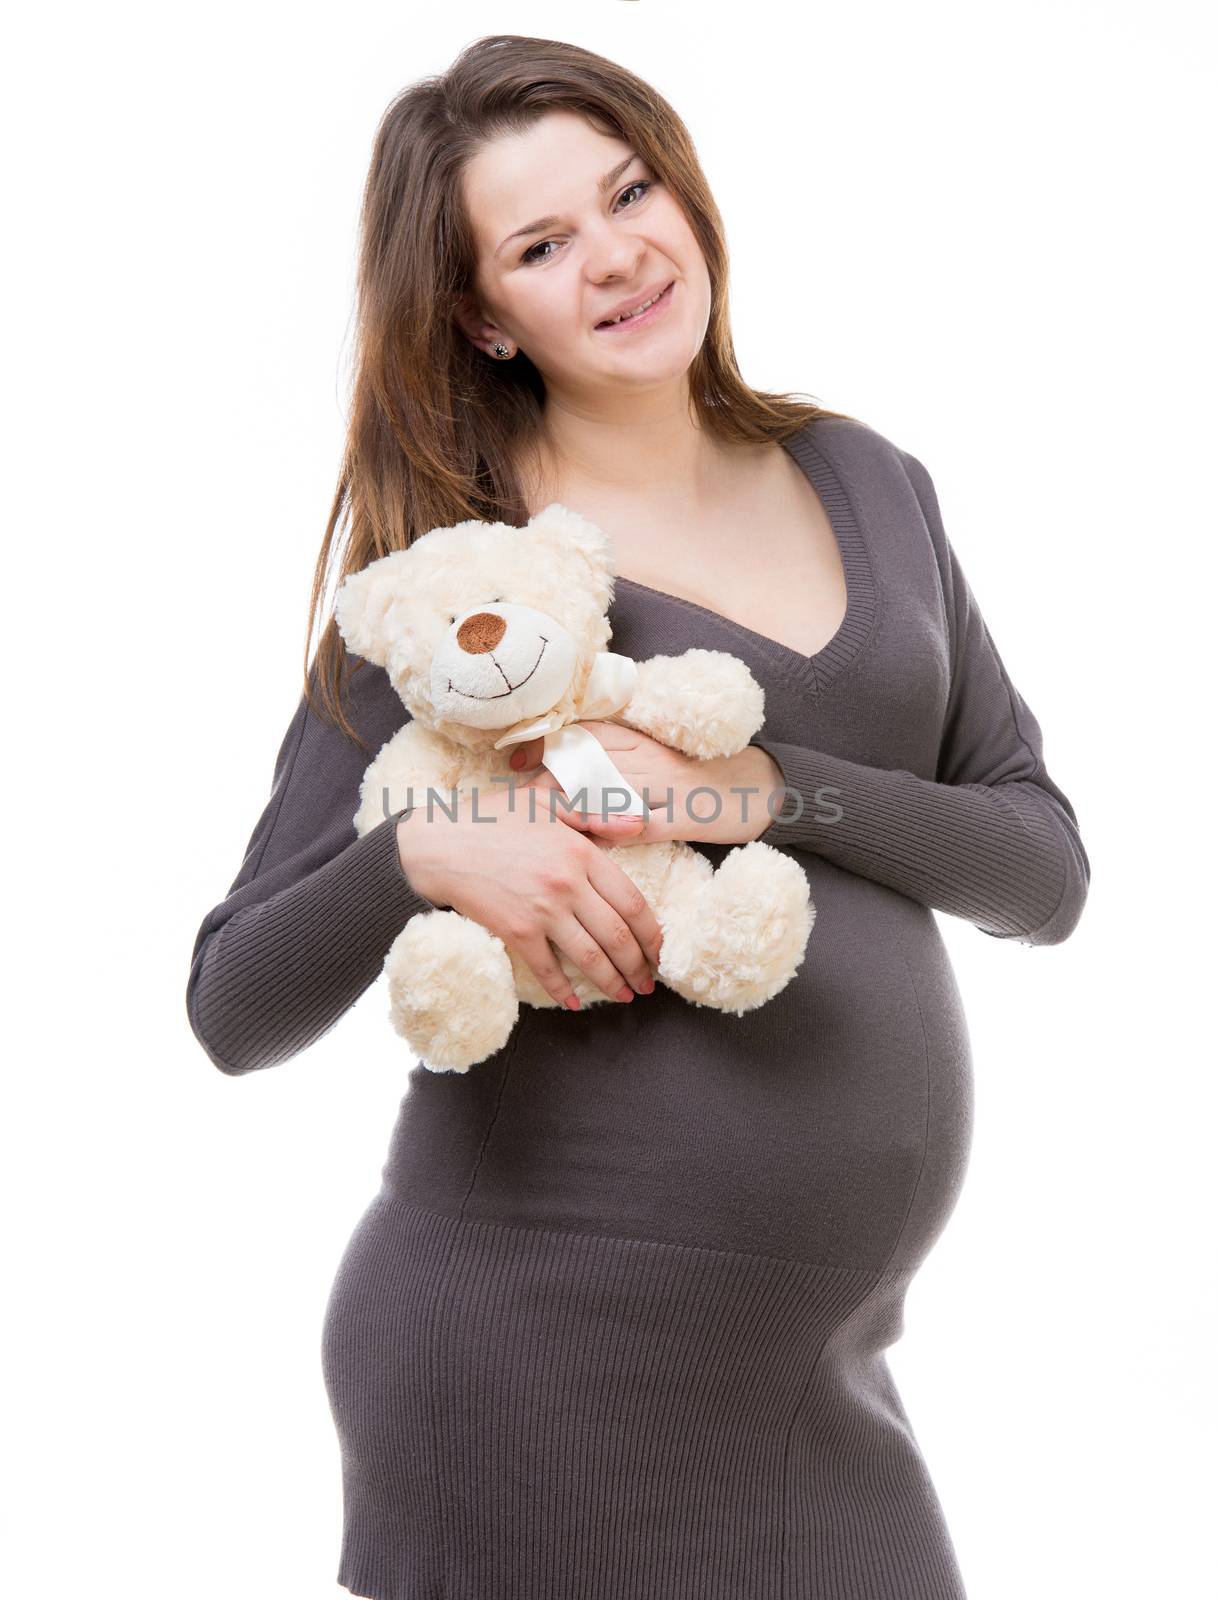 beautiful young pregnant woman in a gray dress with a teddy bear isolated on white background